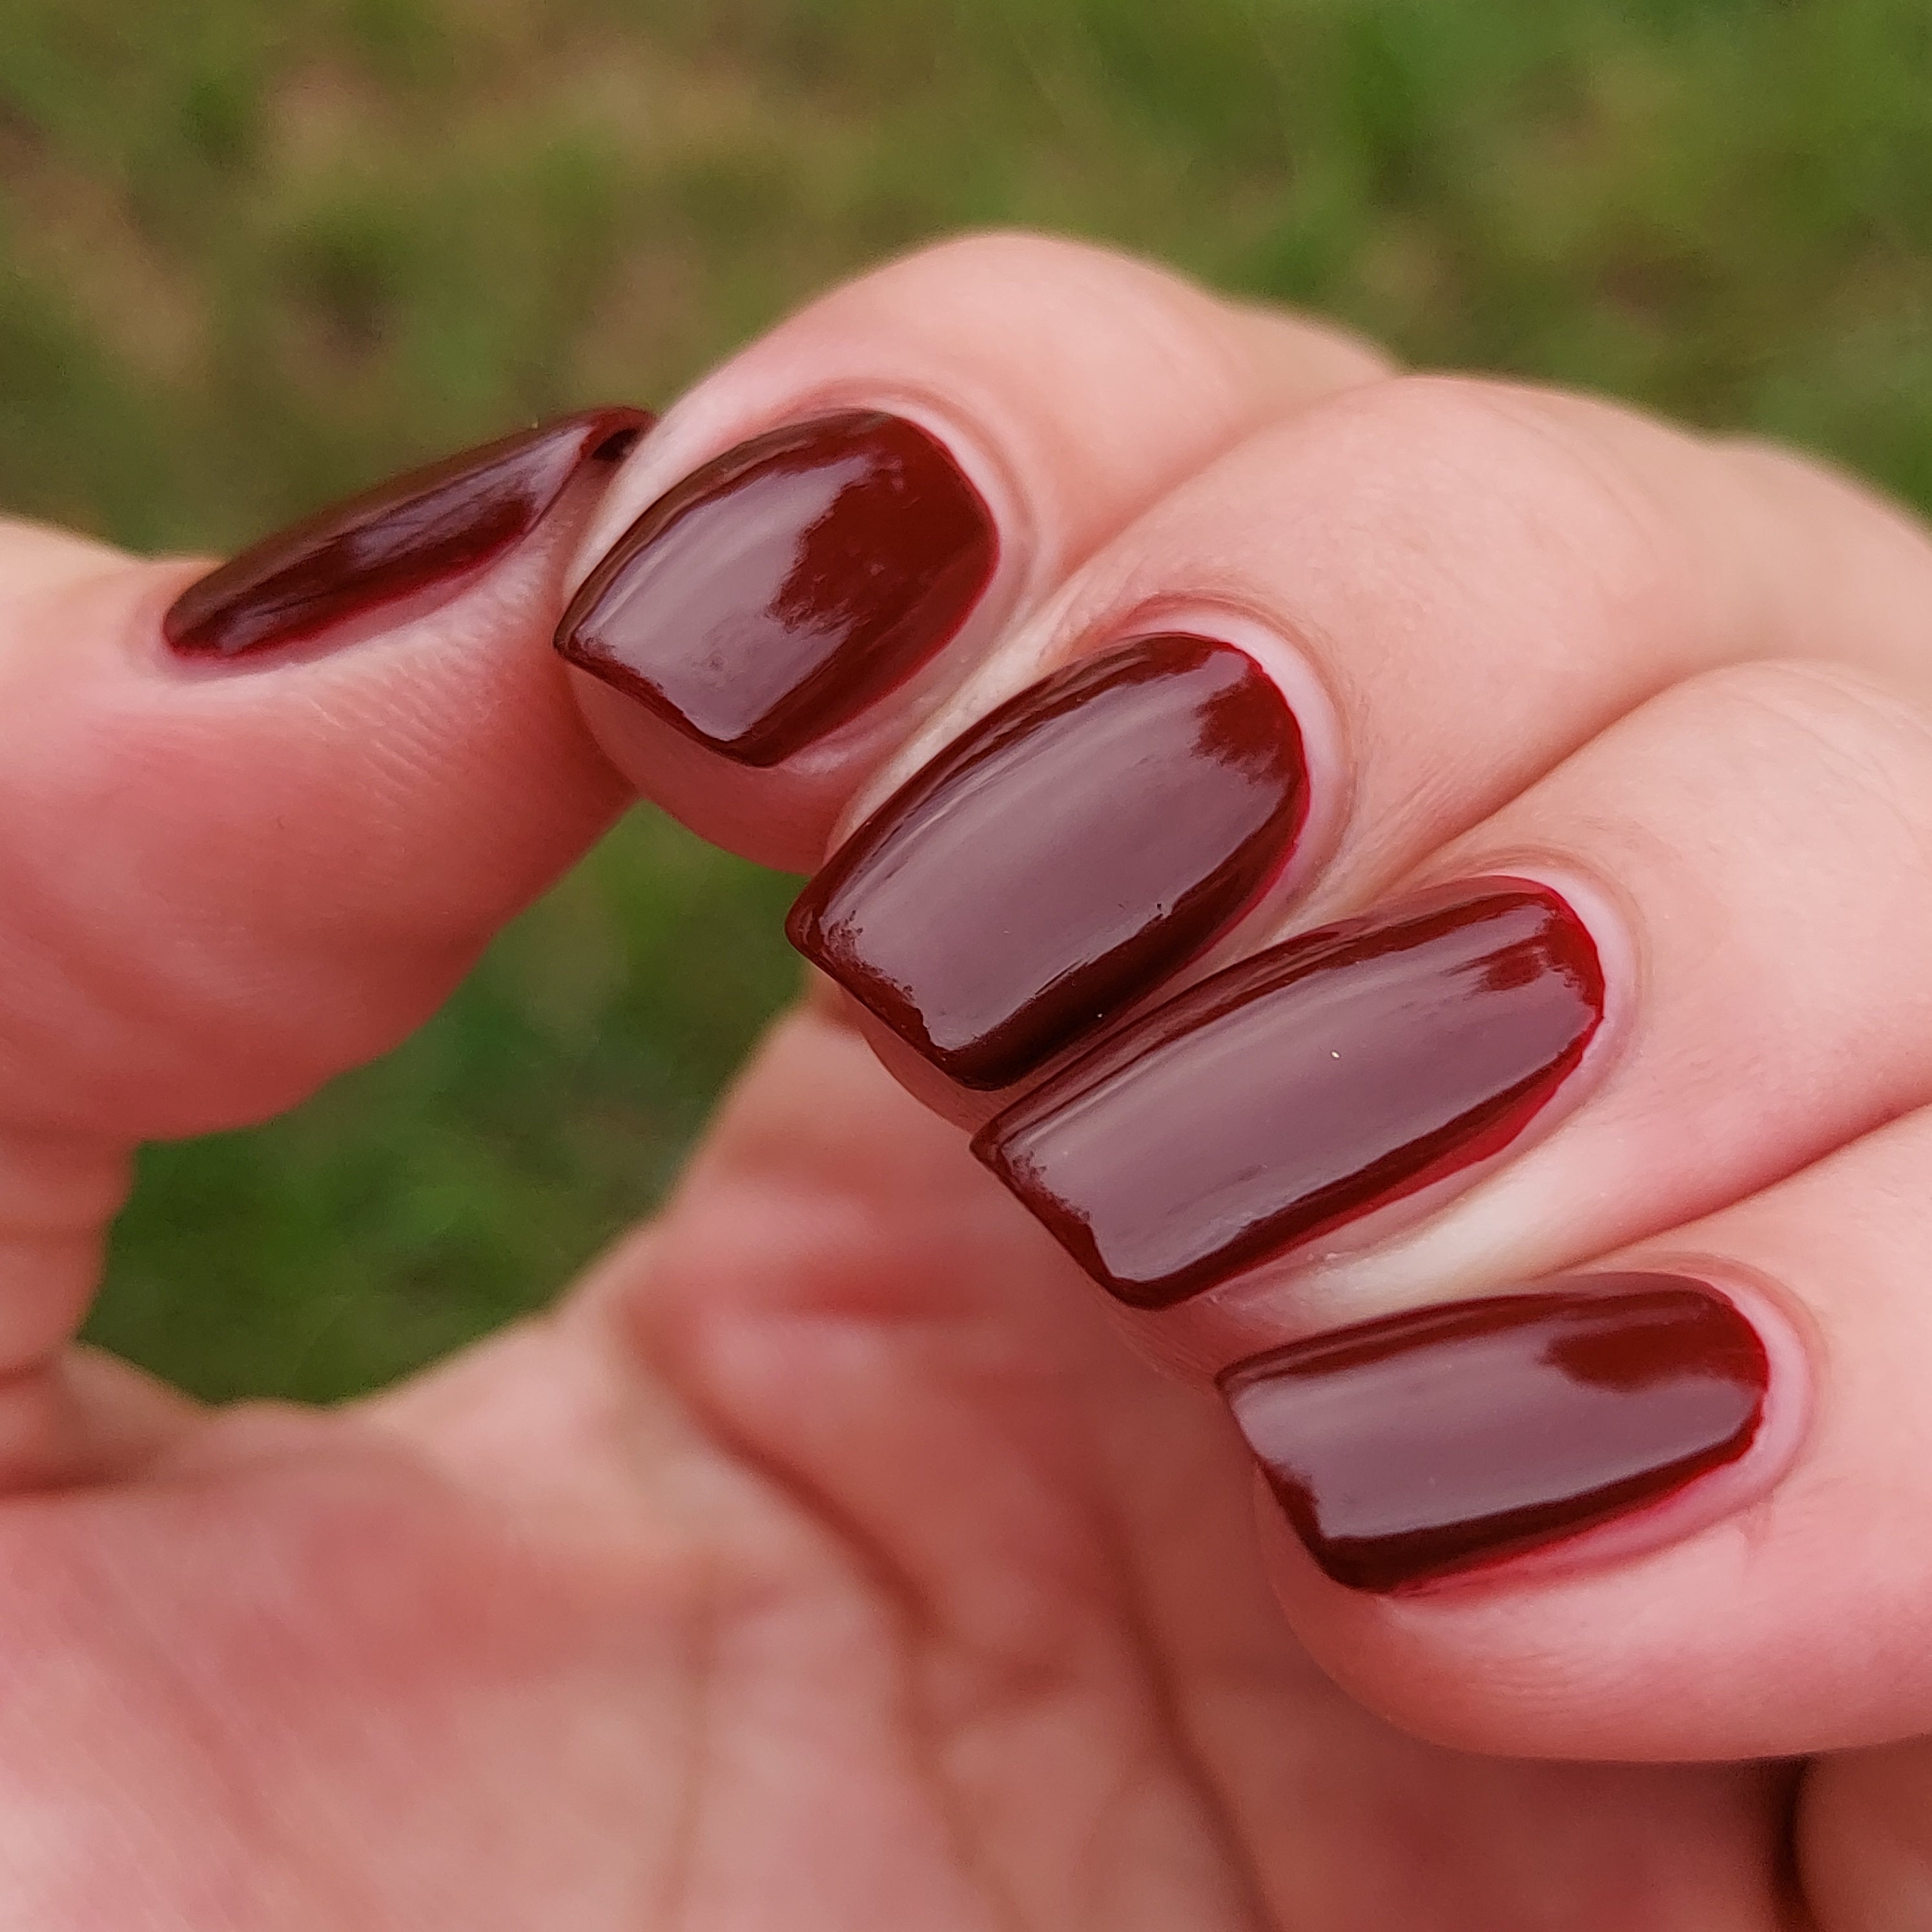 Picture of fingernails painted with a deep maroon vegan non- toxic nail polish